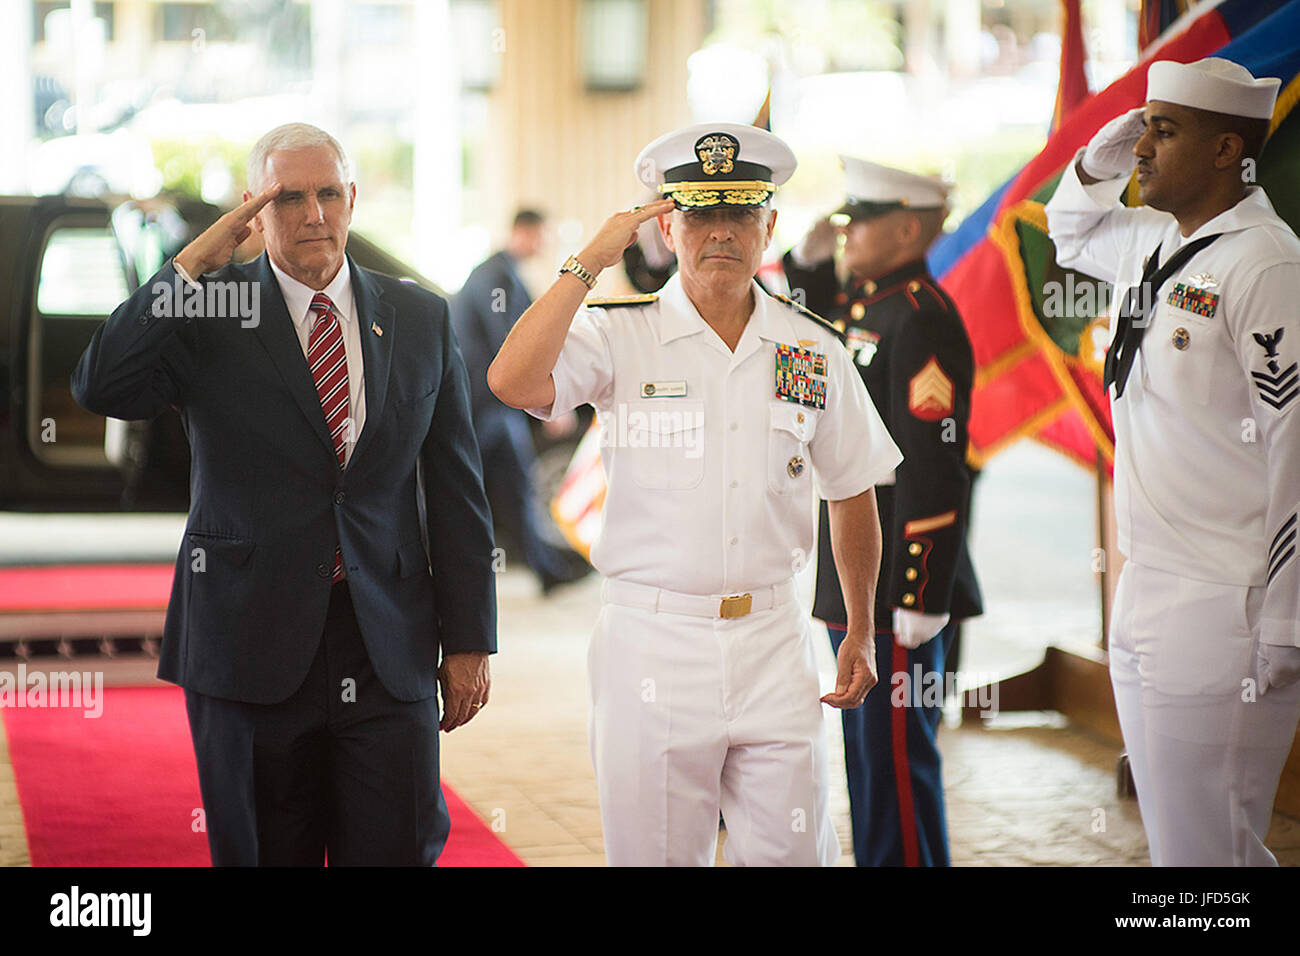 Vice President Mike Pence and Commander of U.S. Pacific Command, Adm. Harry B. Harris Jr., salute troops upon the Vice President’s arrival at Joint Base Pearl Harbor-Hickam in Hawaii, Monday April 24, 2017. (Official White House Photo by Myles Cullen) Stock Photo